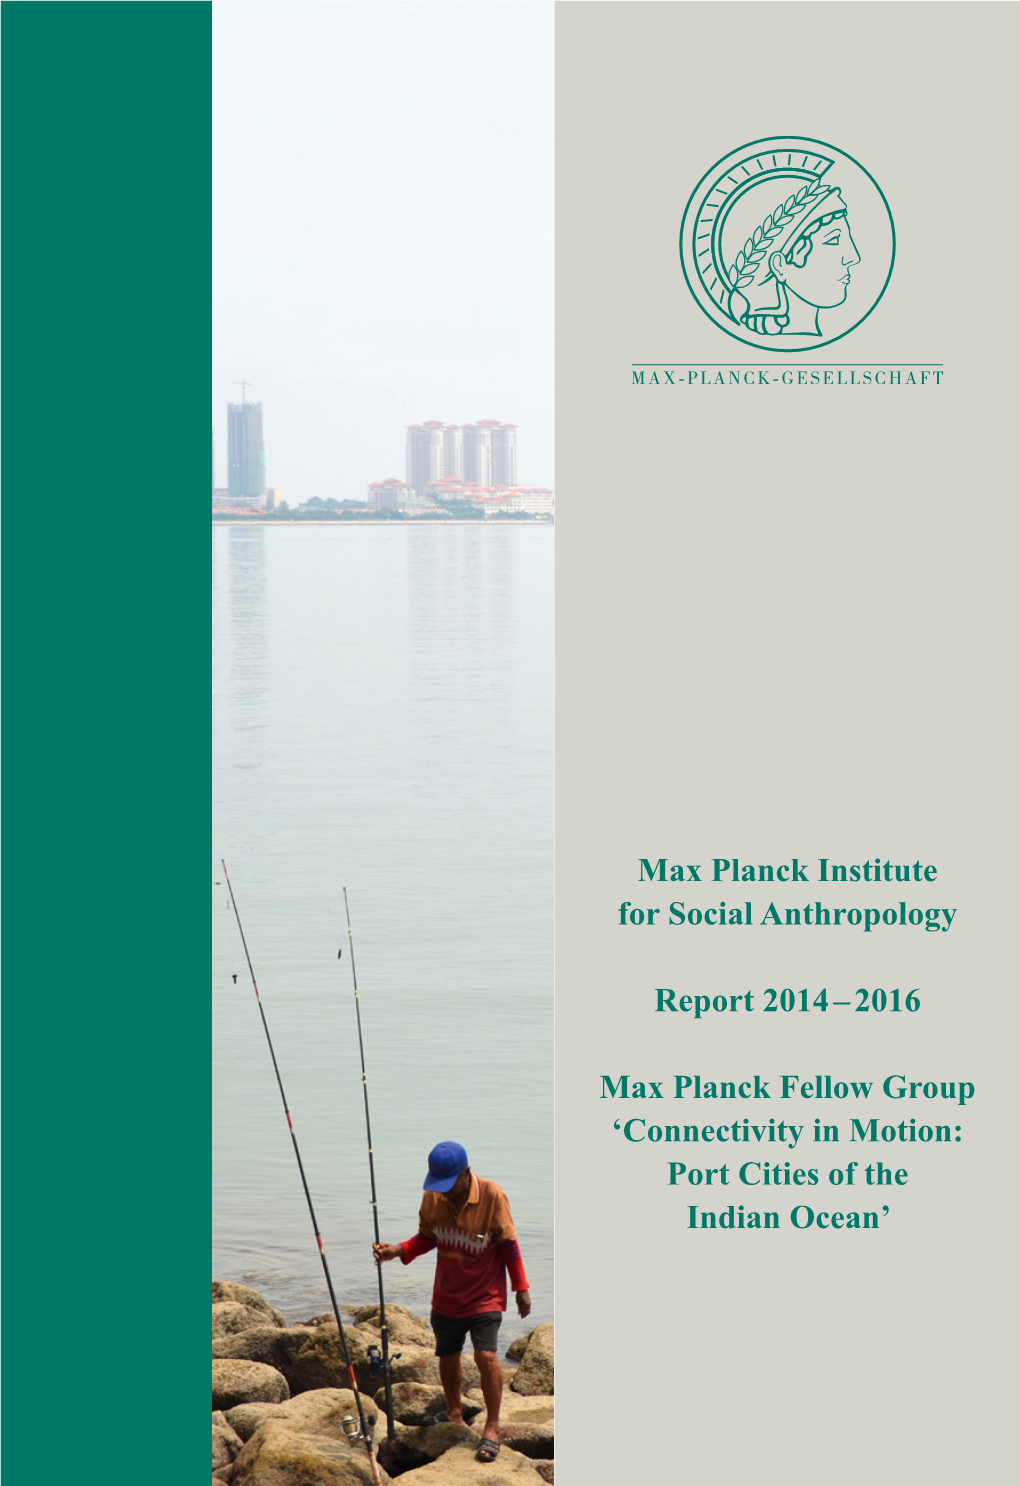 2016 Max Planck Fellow Group 'Connectivity in Motion: Port Cities